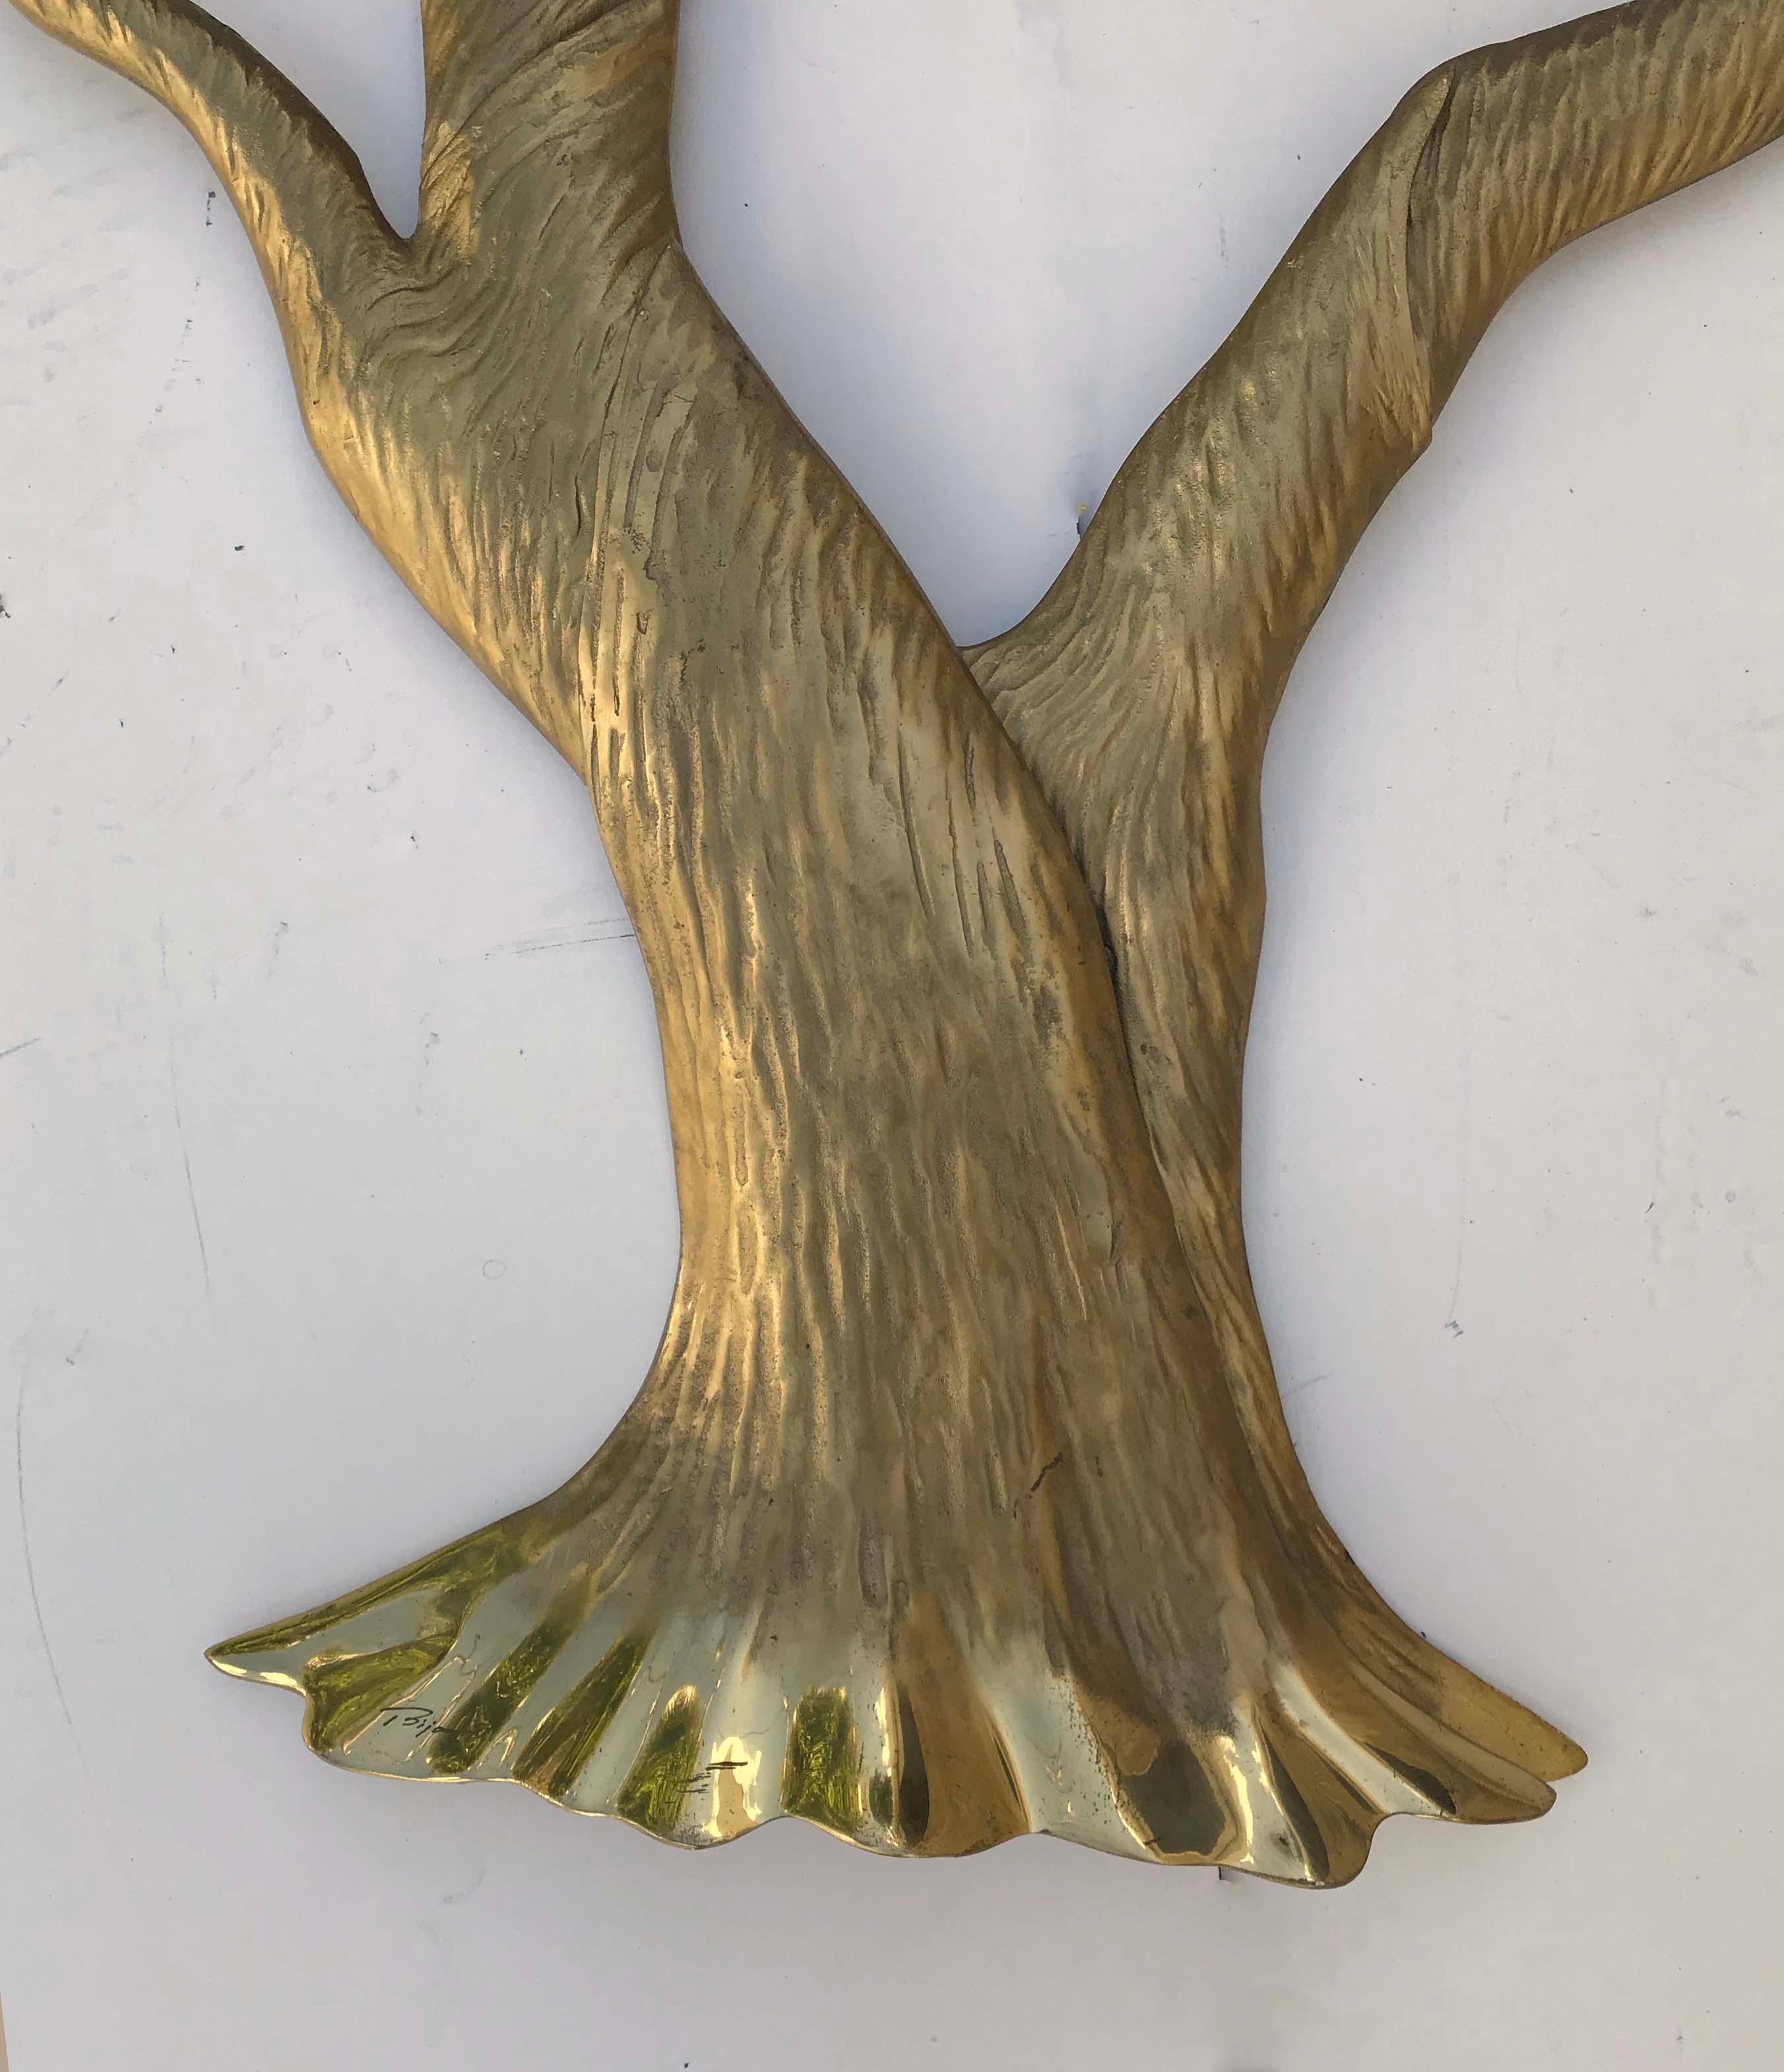 Superb signed Bijan wall sculpture brass tree.
Comes in 5 parts, easy to install.